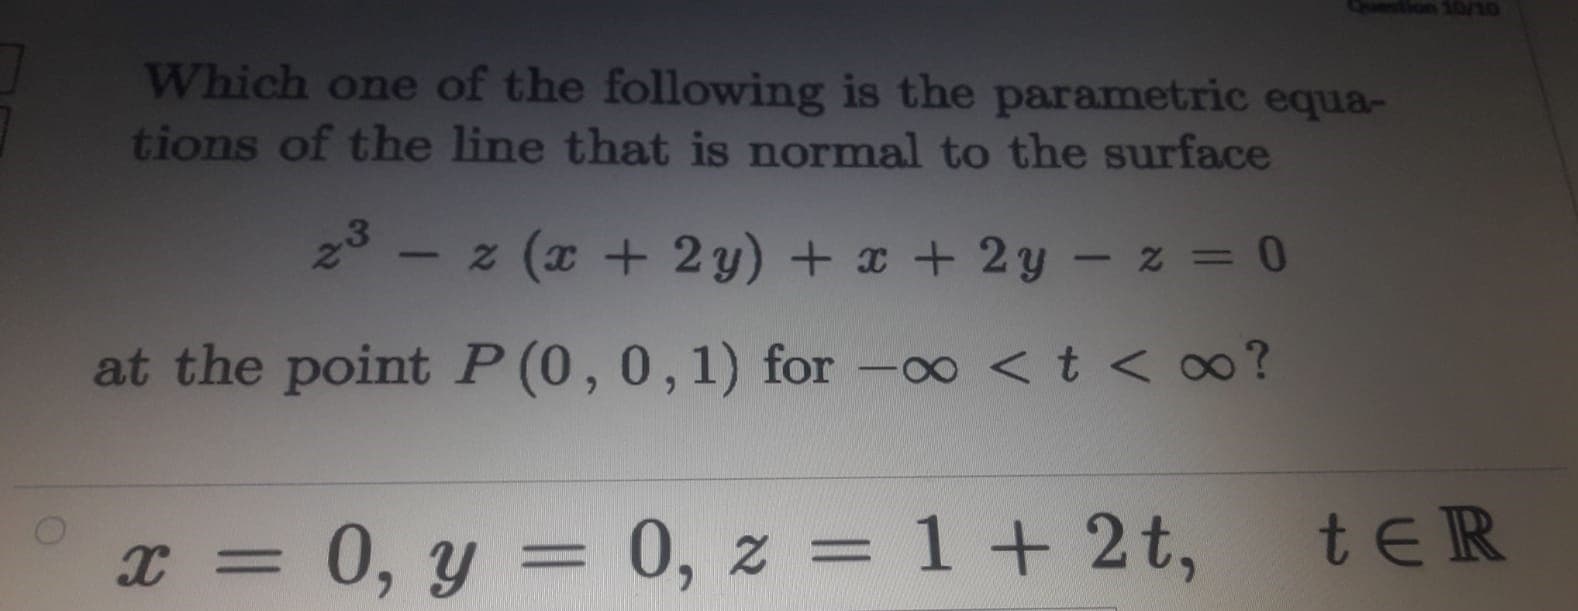 Which one of the following is the parametric equa-
tions of the line that is normal to the surface
23 –
z (x + 2y) + x + 2y – z = 0
at the point P (0,0,1) for -00 <t < ∞?
